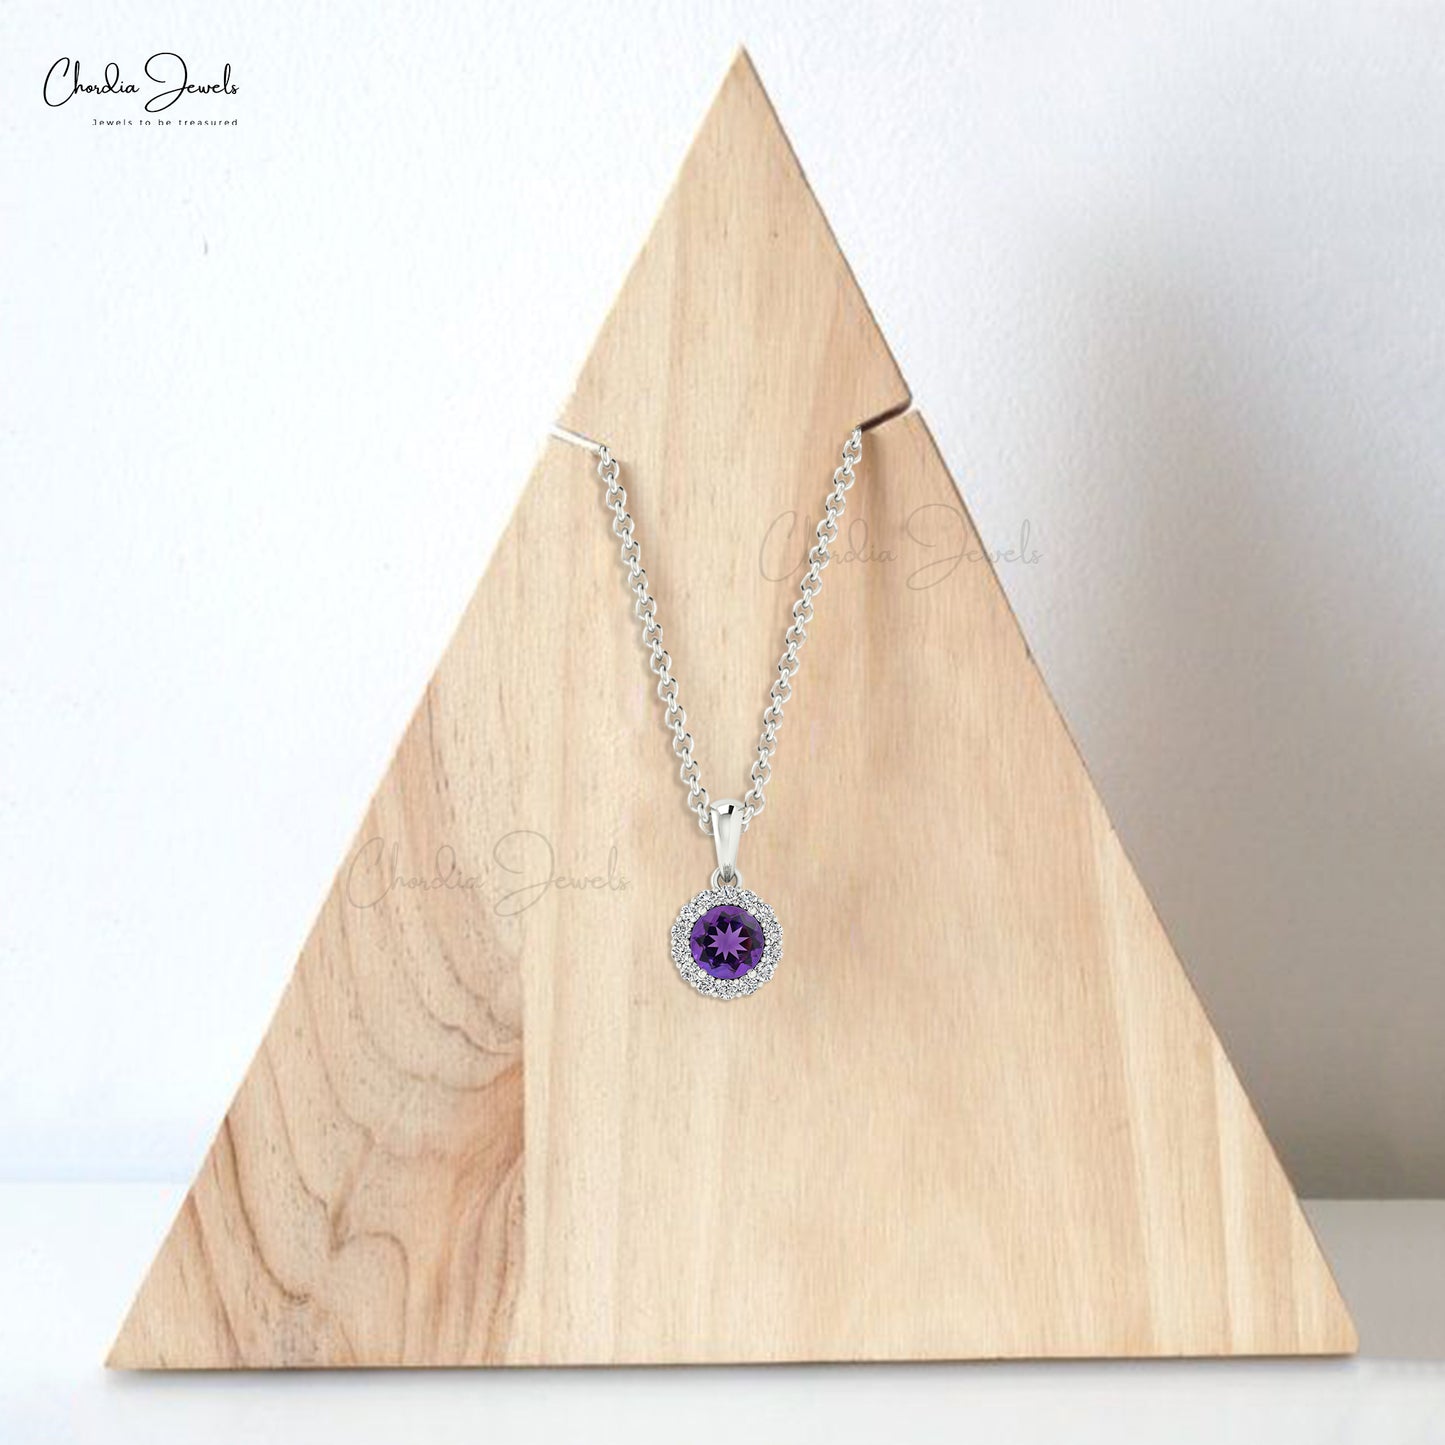 Natural Amethyst Pendant, 14k Solid Gold Diamond Pendant, 4mm Round Cut Gemstone Halo Pendant Gift for Wife